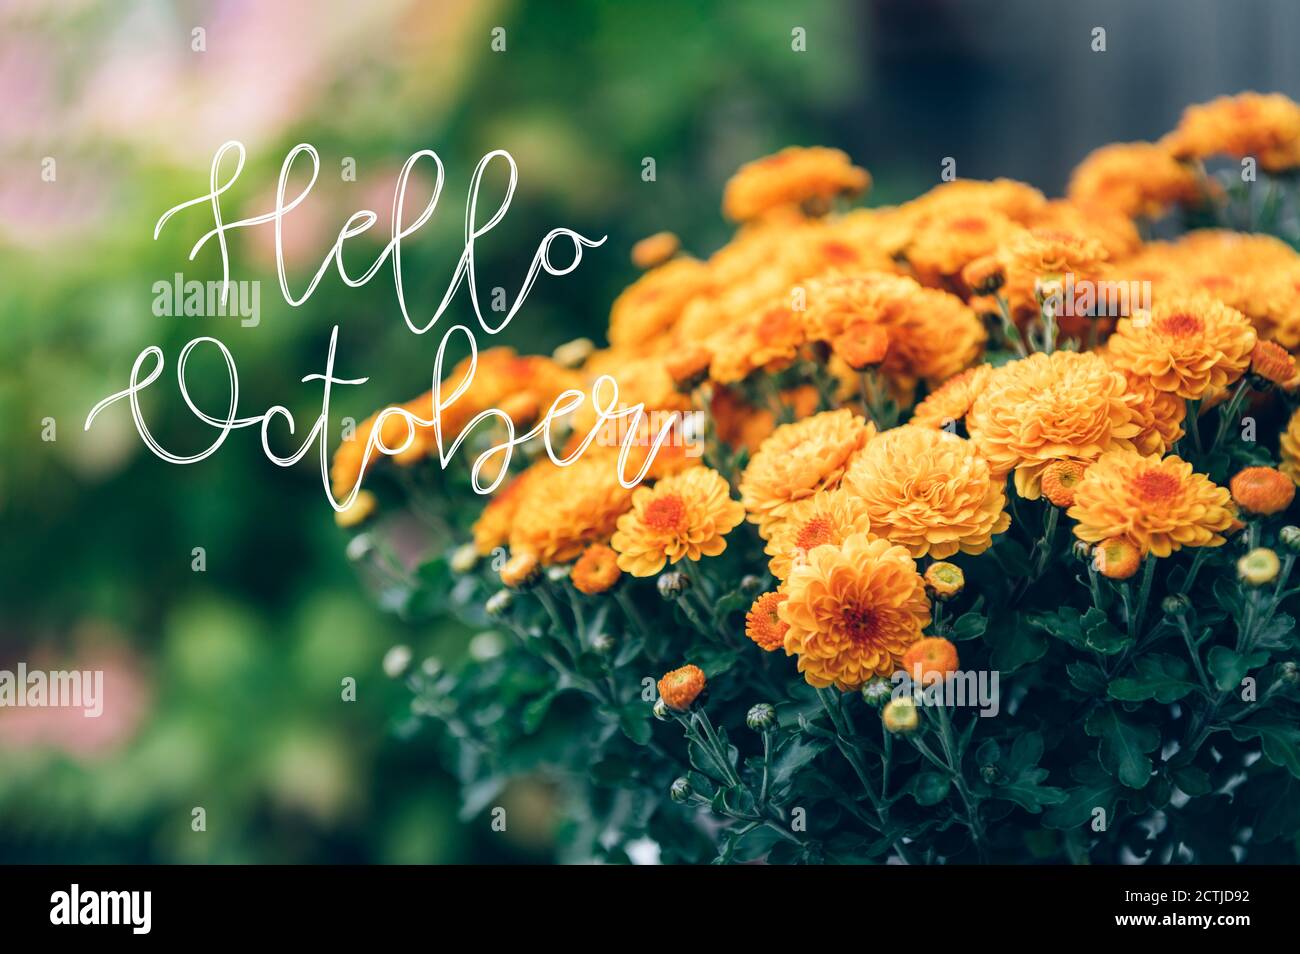 Hello October text and chrysanthemum Stock Photo